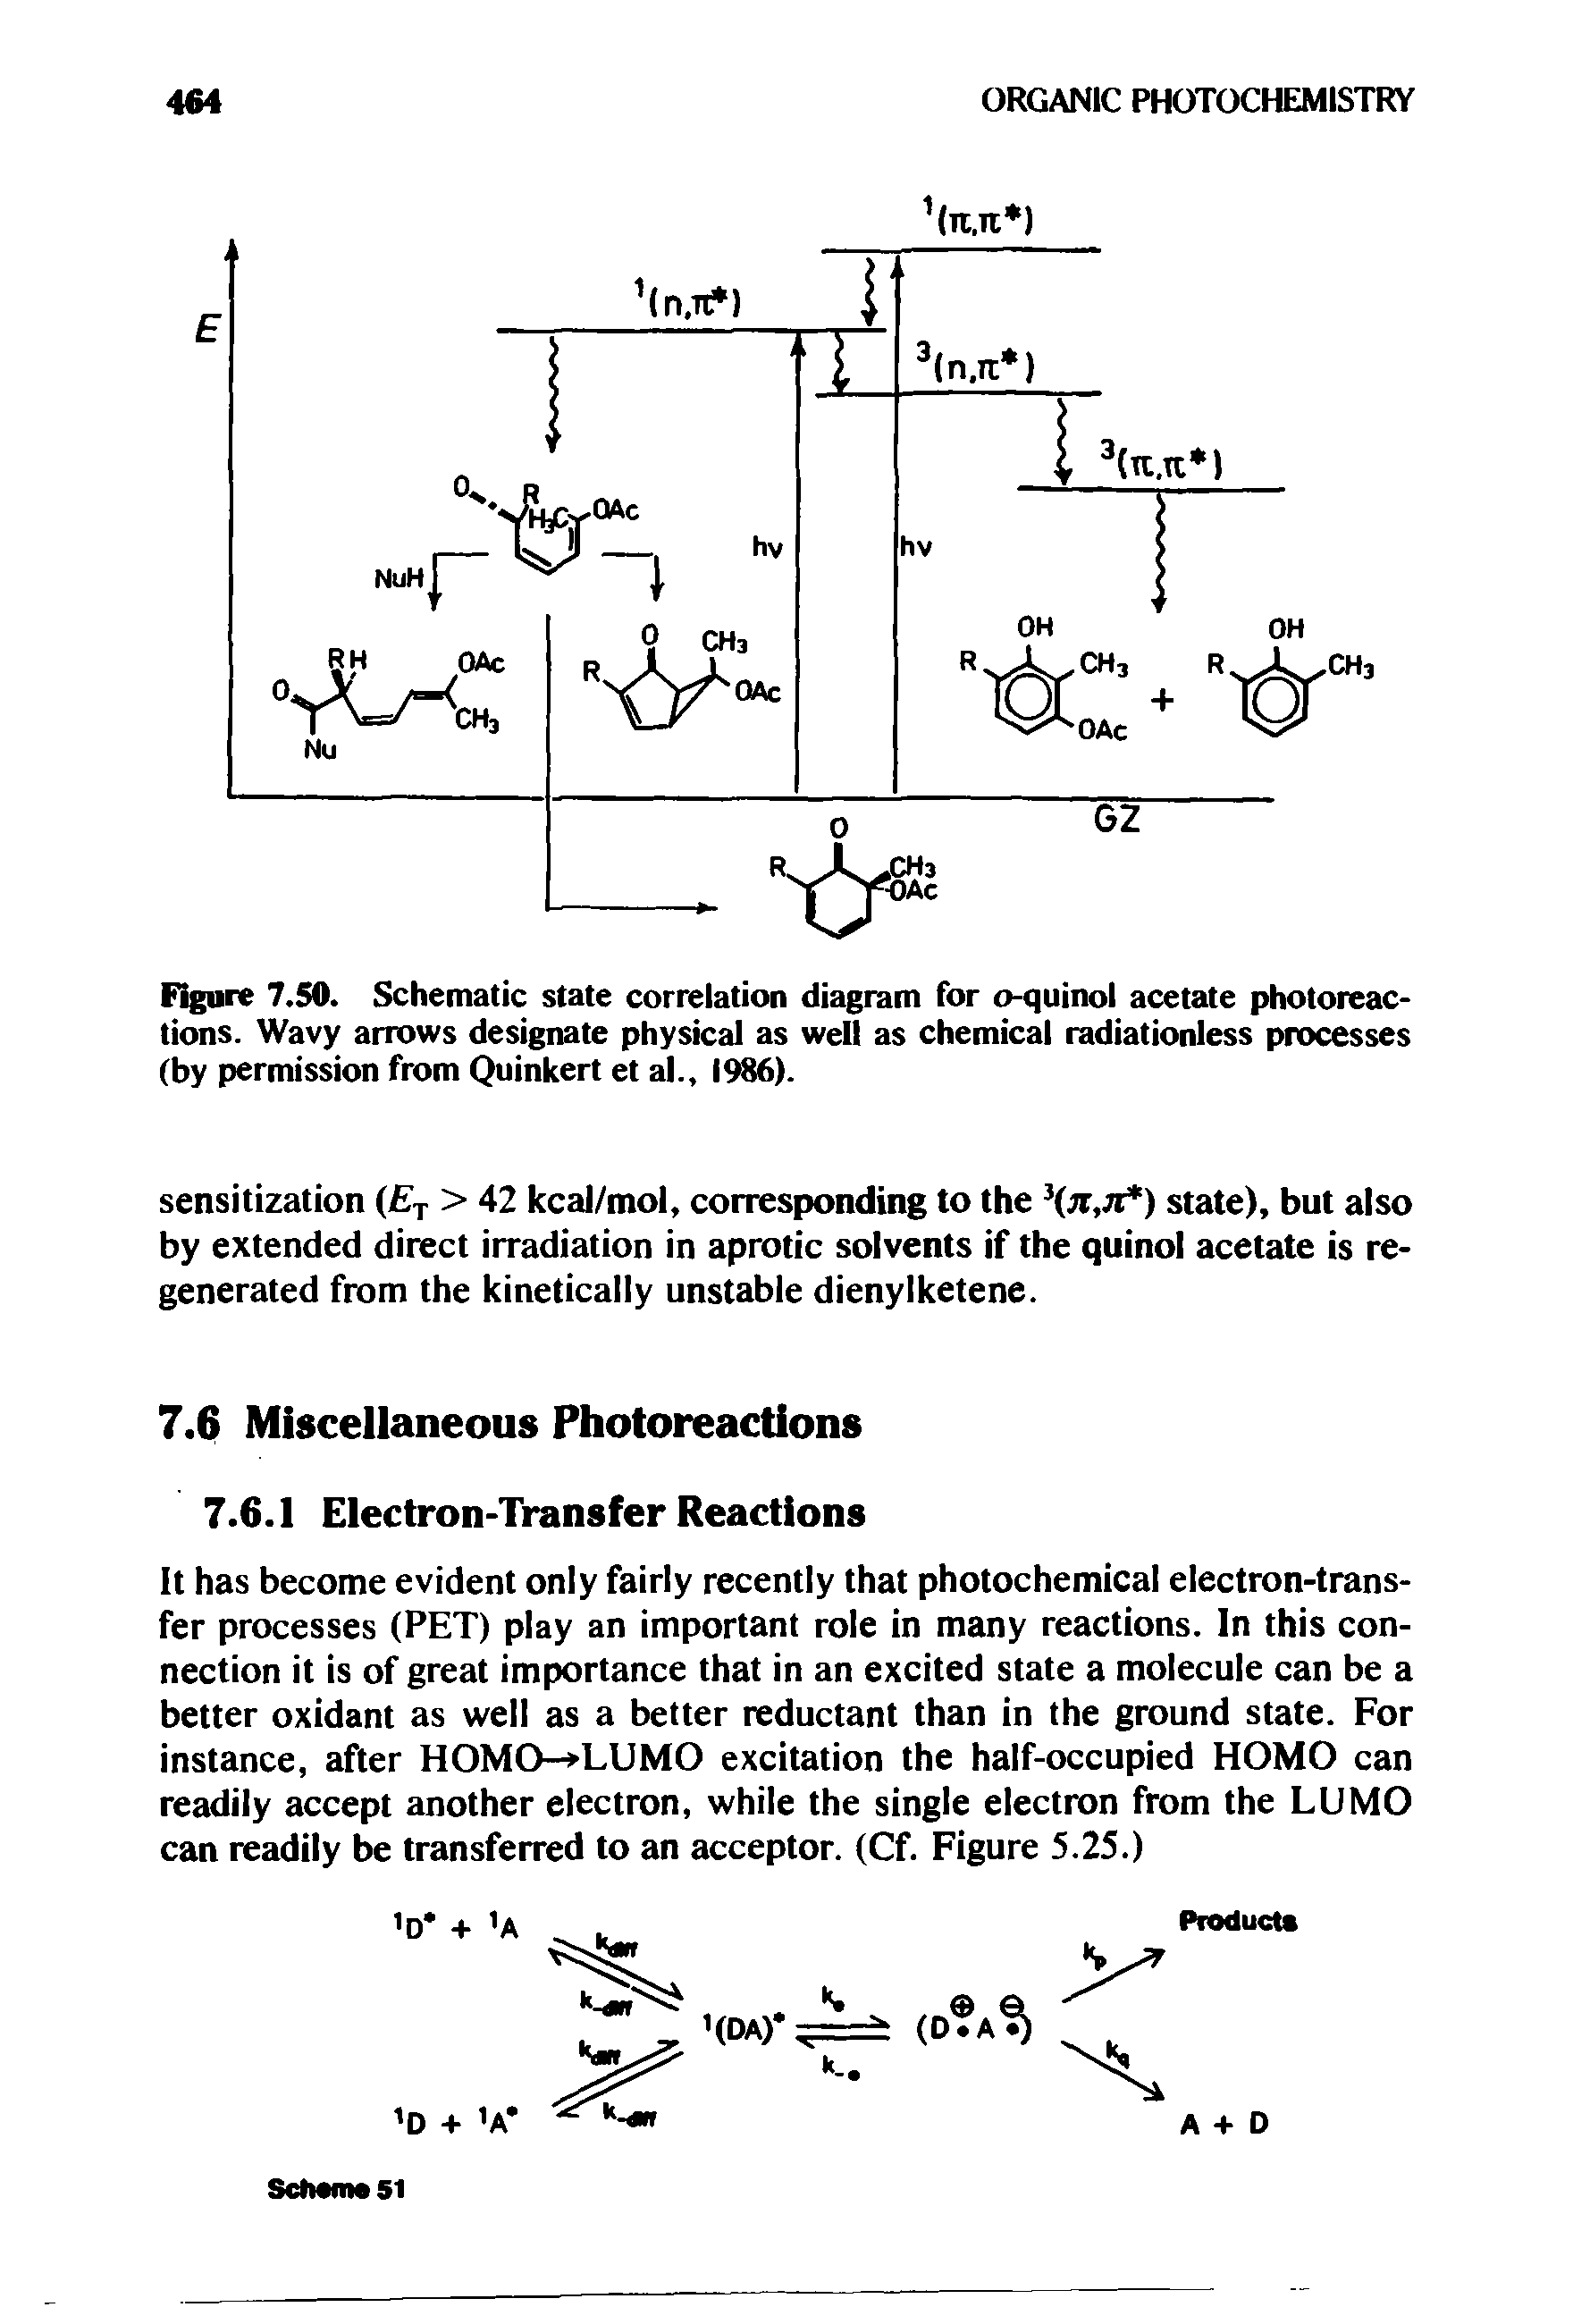 Figure 7.50. Schematic state correlation diagram for o-quinol acetate photoreactions. Wavy arrows designate physical as well as chemical radiationless processes (by permission from Quinkert et al., 1986).